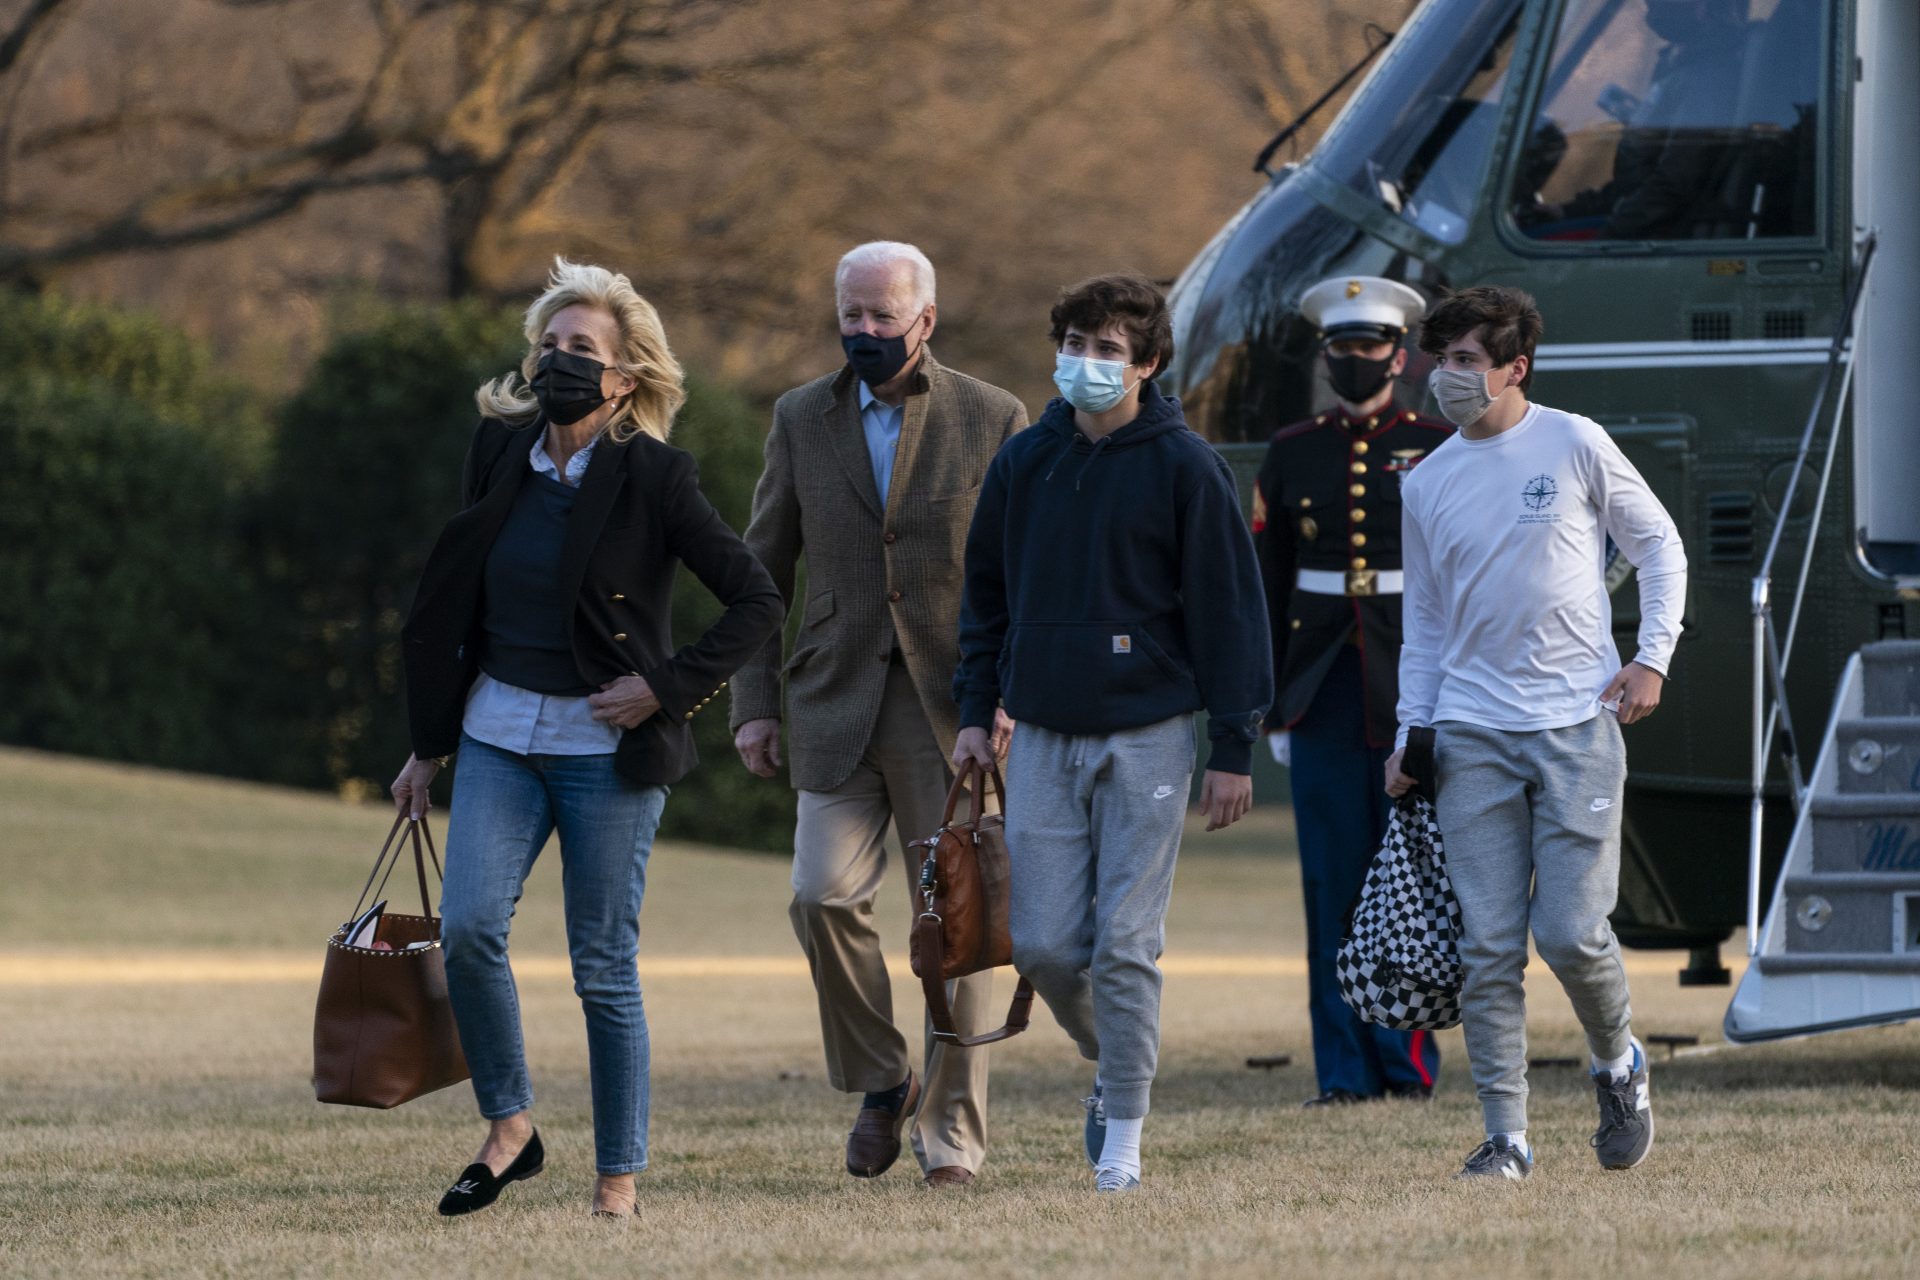 President Joe Biden and first lady Jill Biden with their grandson Hunter Biden, walk on the South Lawn upon arrival at the White House in Washington from a weekend trip to Wilmington, Del., Sunday, March 14, 2021.